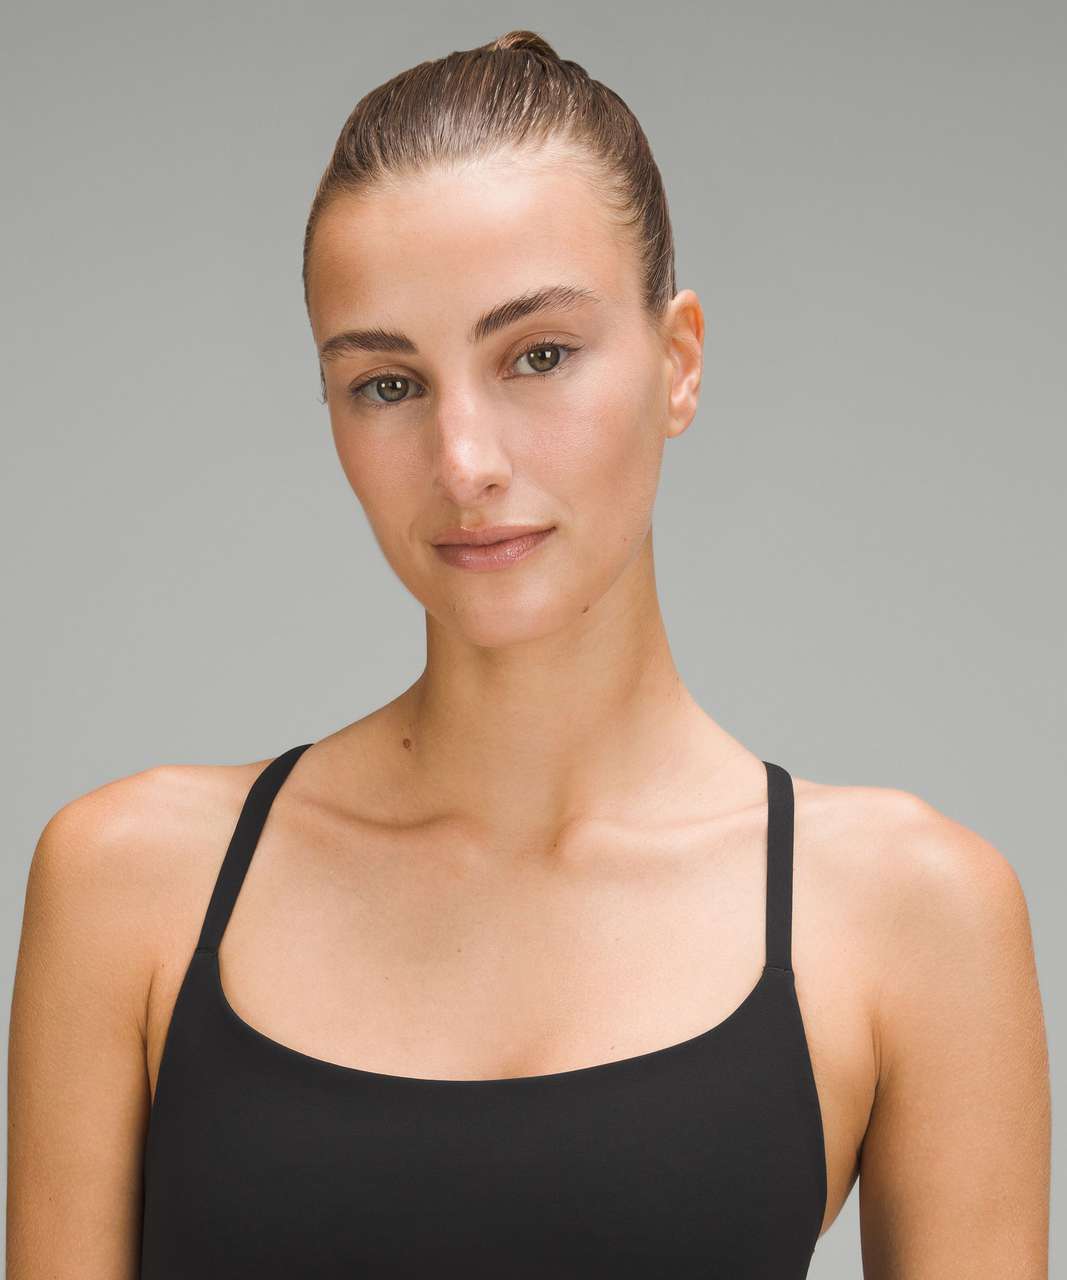 Lululemon Wunder Train Strappy Racer Bra *Light Support, A/B Cup - Black (Third Release)